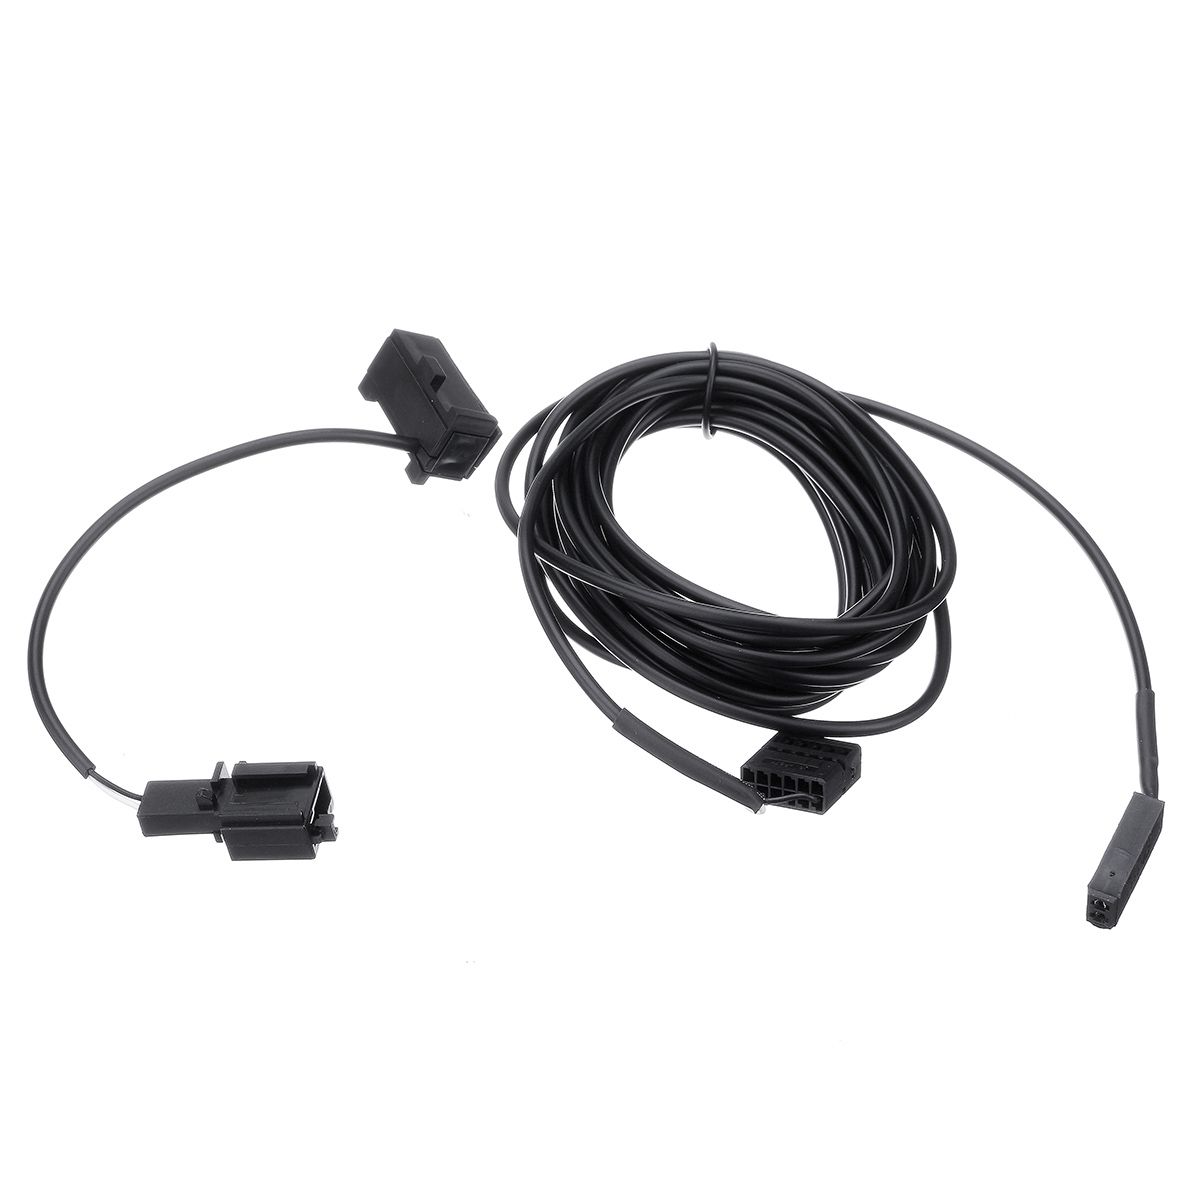 4m-Car-CD-USB-Microphone-bluetooth-Aux-Cable-Auto-Wireless-Audio-Input-Speaker-Adapter-for-BMW-1-3-S-1480556